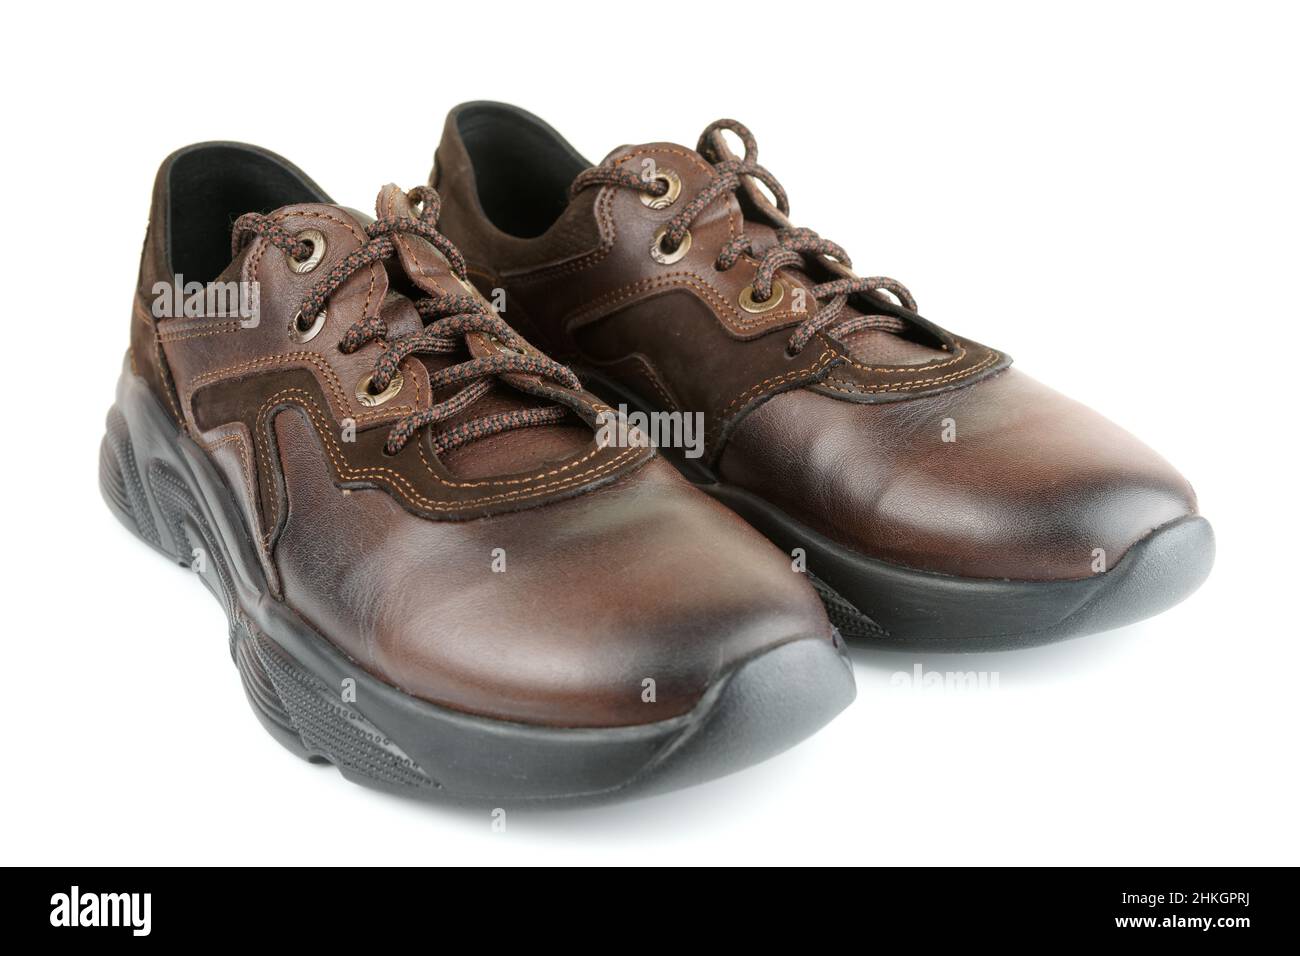 Brown leather walking shoes on white background Stock Photo